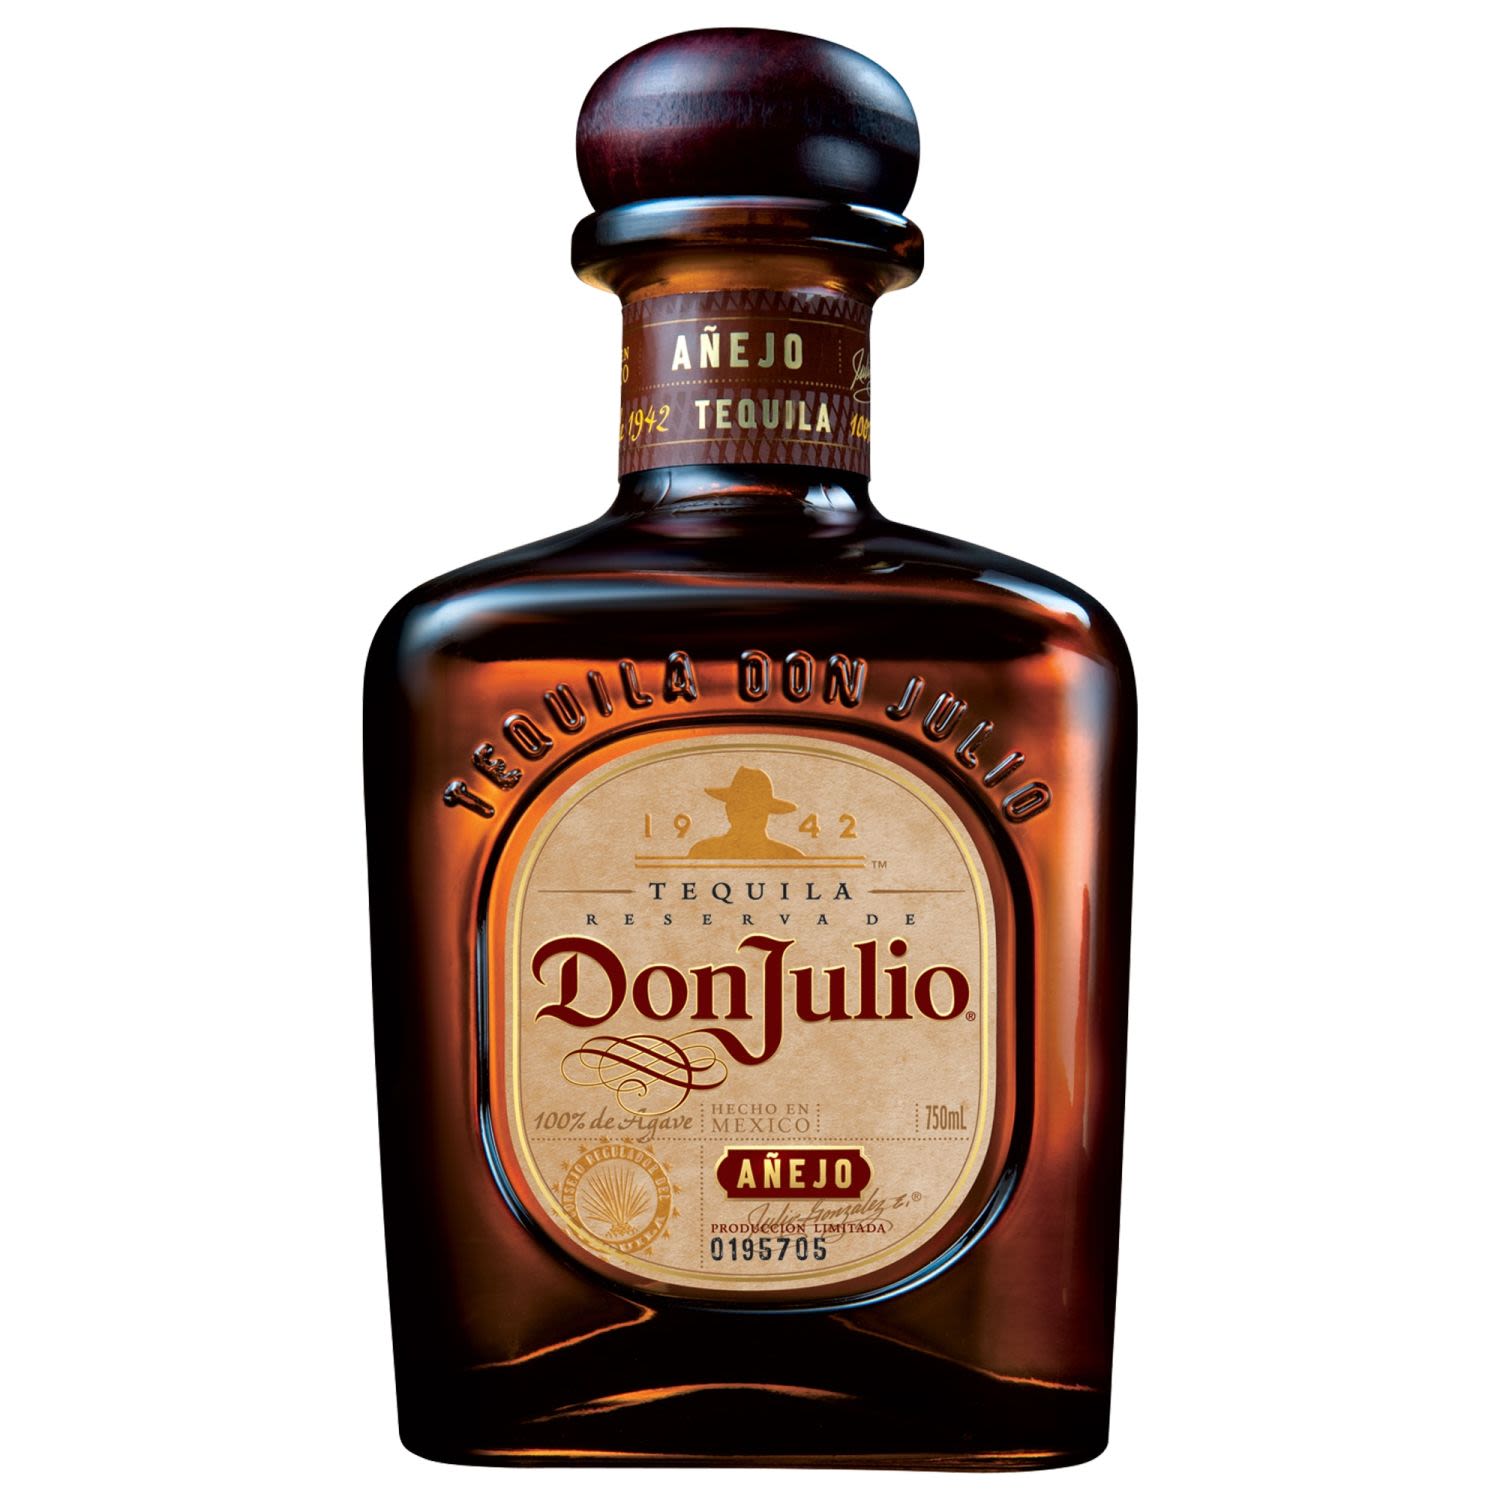 Barrel aged in smaller batches for eighteen months in American white-oak barrels, Don Julio® Añejo Tequila is a testament to the craft of making a superior tasting, aged tequila. Rich, distinctive and wonderfully complex, its flavor strikes the perfect balance between agave, wood and hints of vanilla. Best experienced neat in a snifter or simply on the rocks.<br /> <br />Alcohol Volume: 38.00%<br /><br />Pack Format: Bottle<br /><br />Standard Drinks: 22</br /><br />Pack Type: Bottle<br />